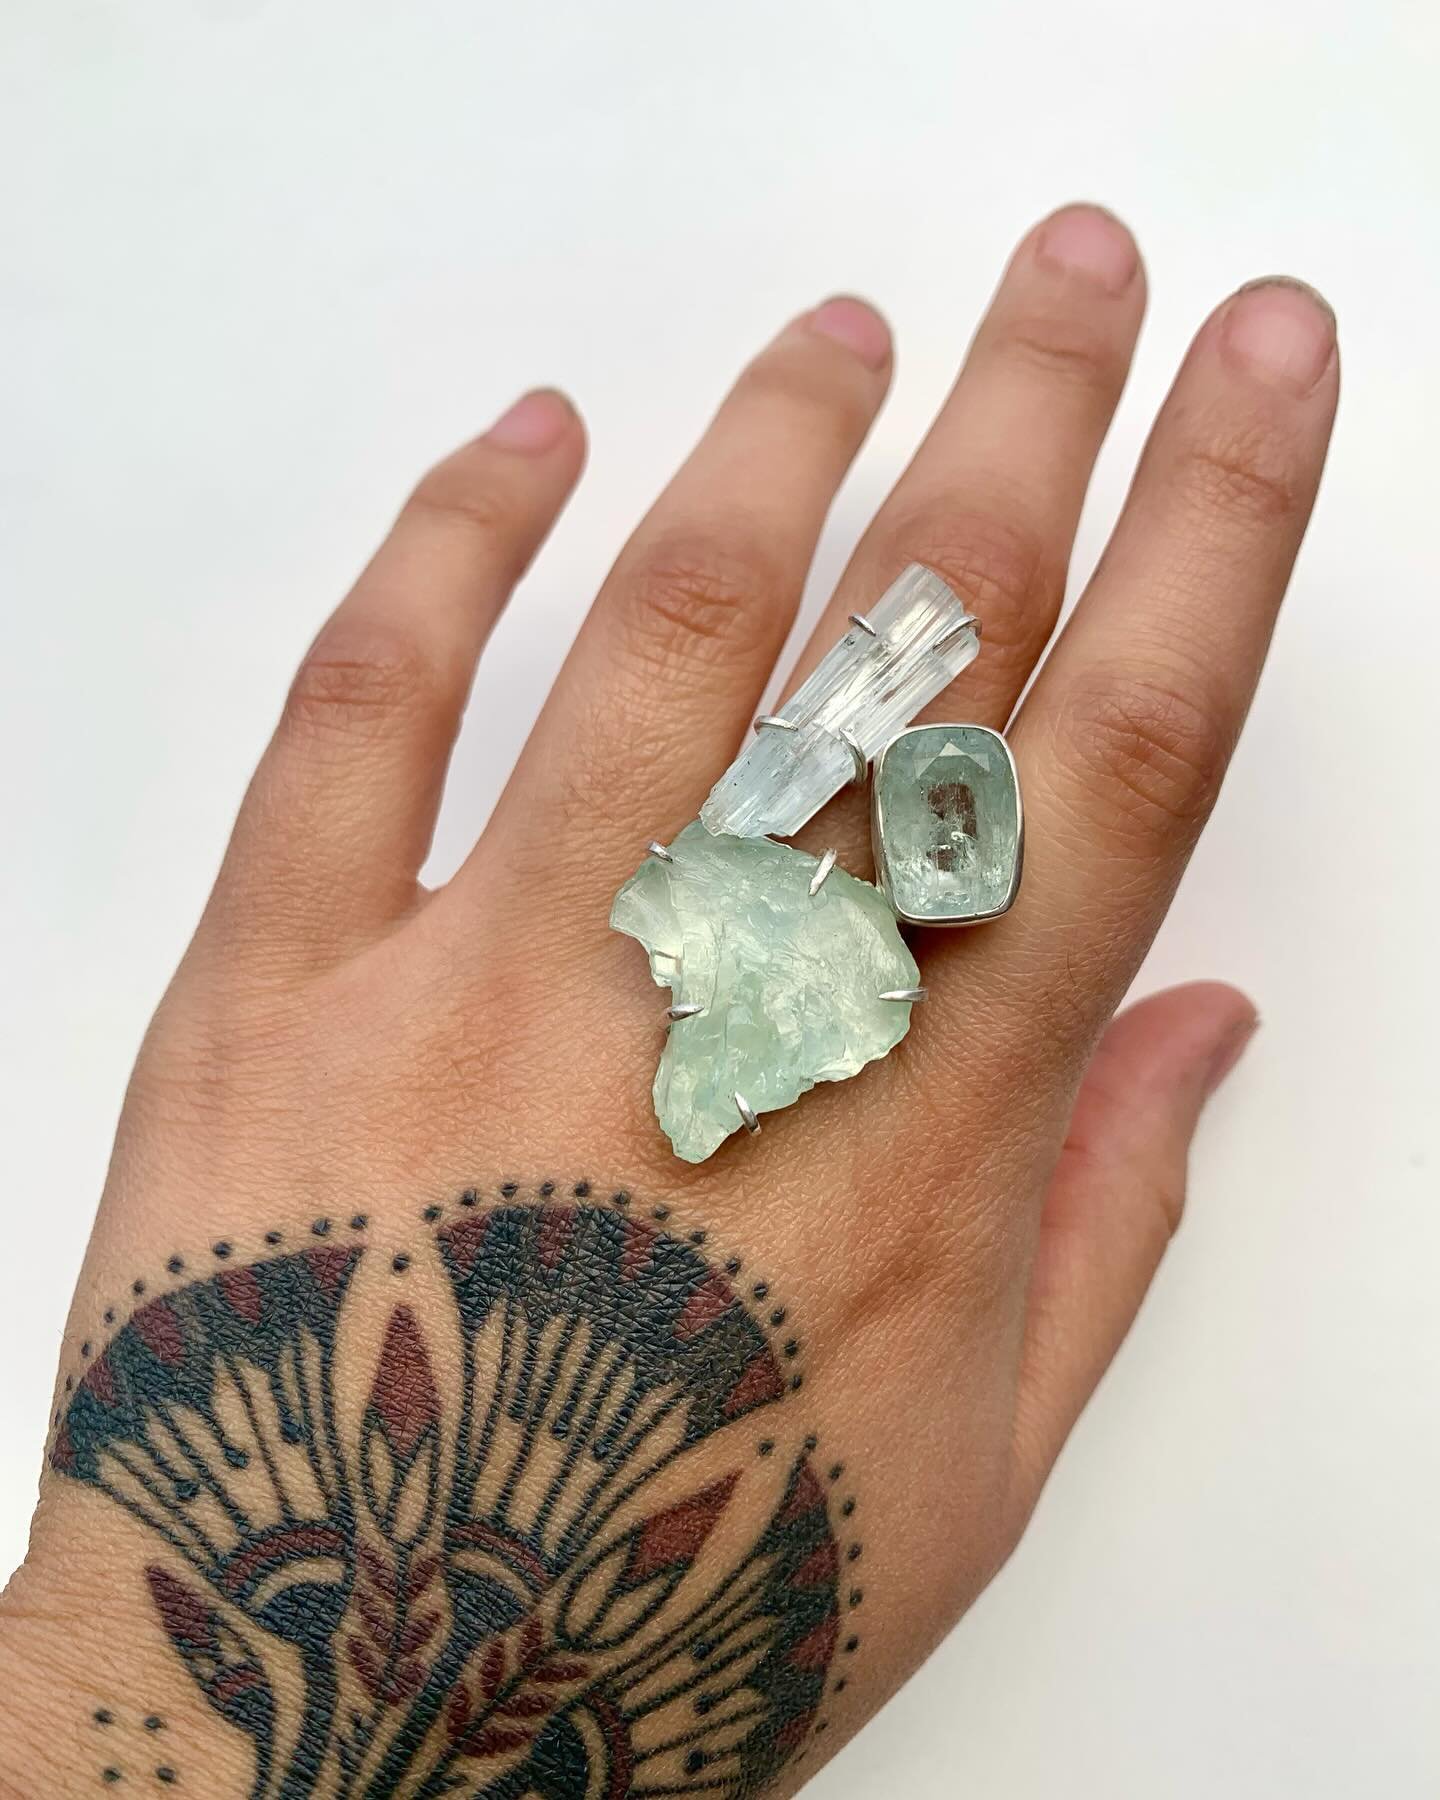 Some more Aquamarine goodness for Pisces season! ♓️ Available in my shop✨ P.S. New Pisces mini collection coming mid March! ♓️💎
&bull;
&bull;
&bull;
#pisces #piscesszn #pisces♓ #piscesseason #aquamarine #aquamarinejewelry #statementjewelry #statemen